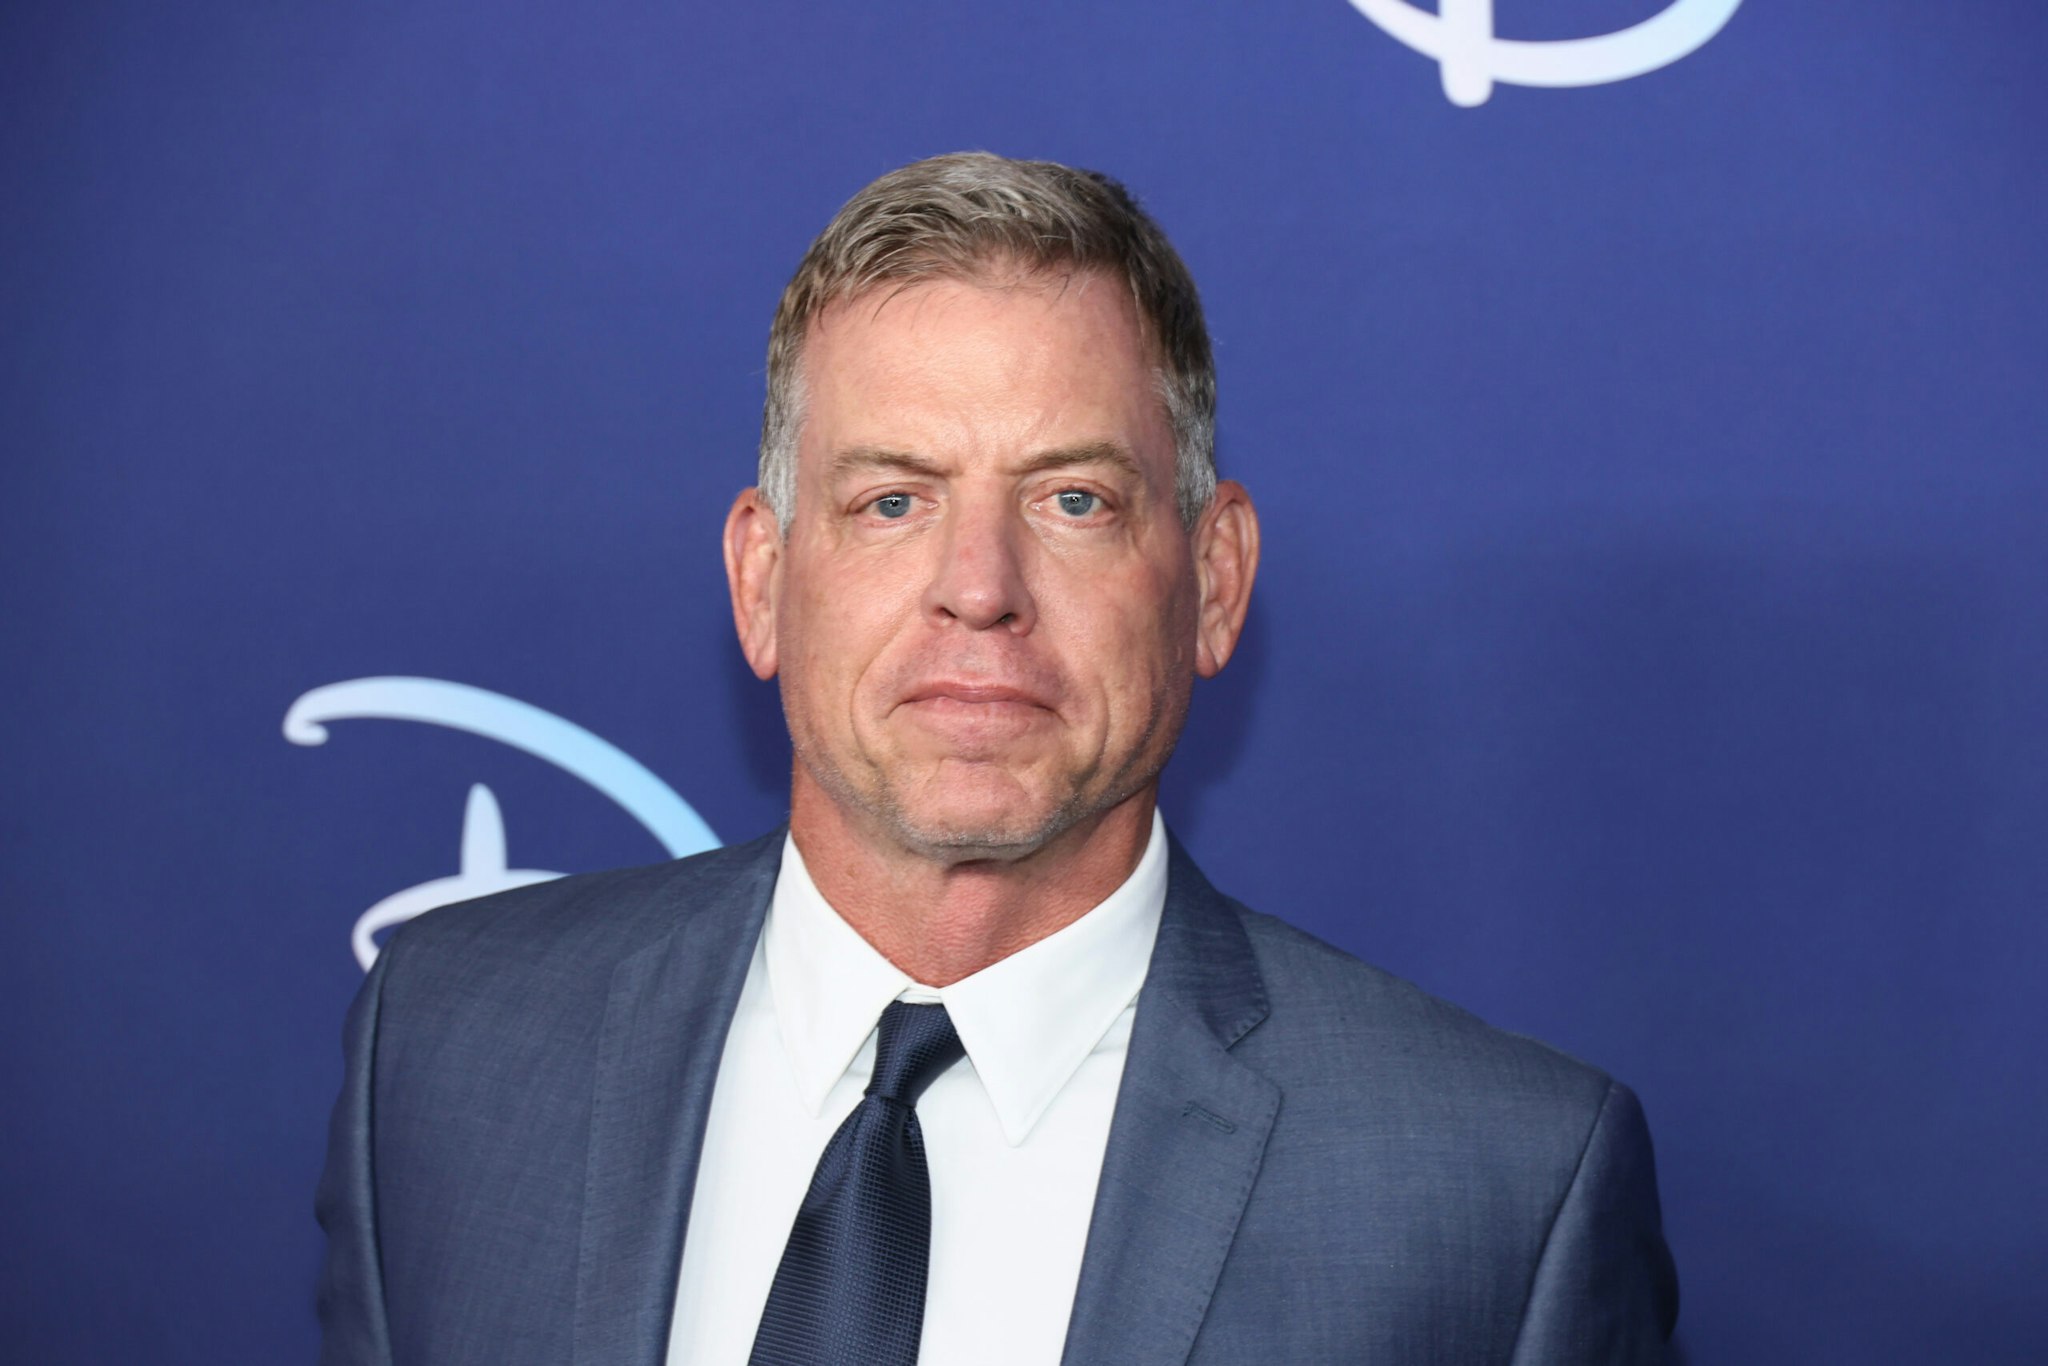 The cancel mob is out to sack Hall of Fame quarterback-turned NFL announcer Troy Aikman, after his allegedly sexist comment on a penalty called during Monday Night Football.